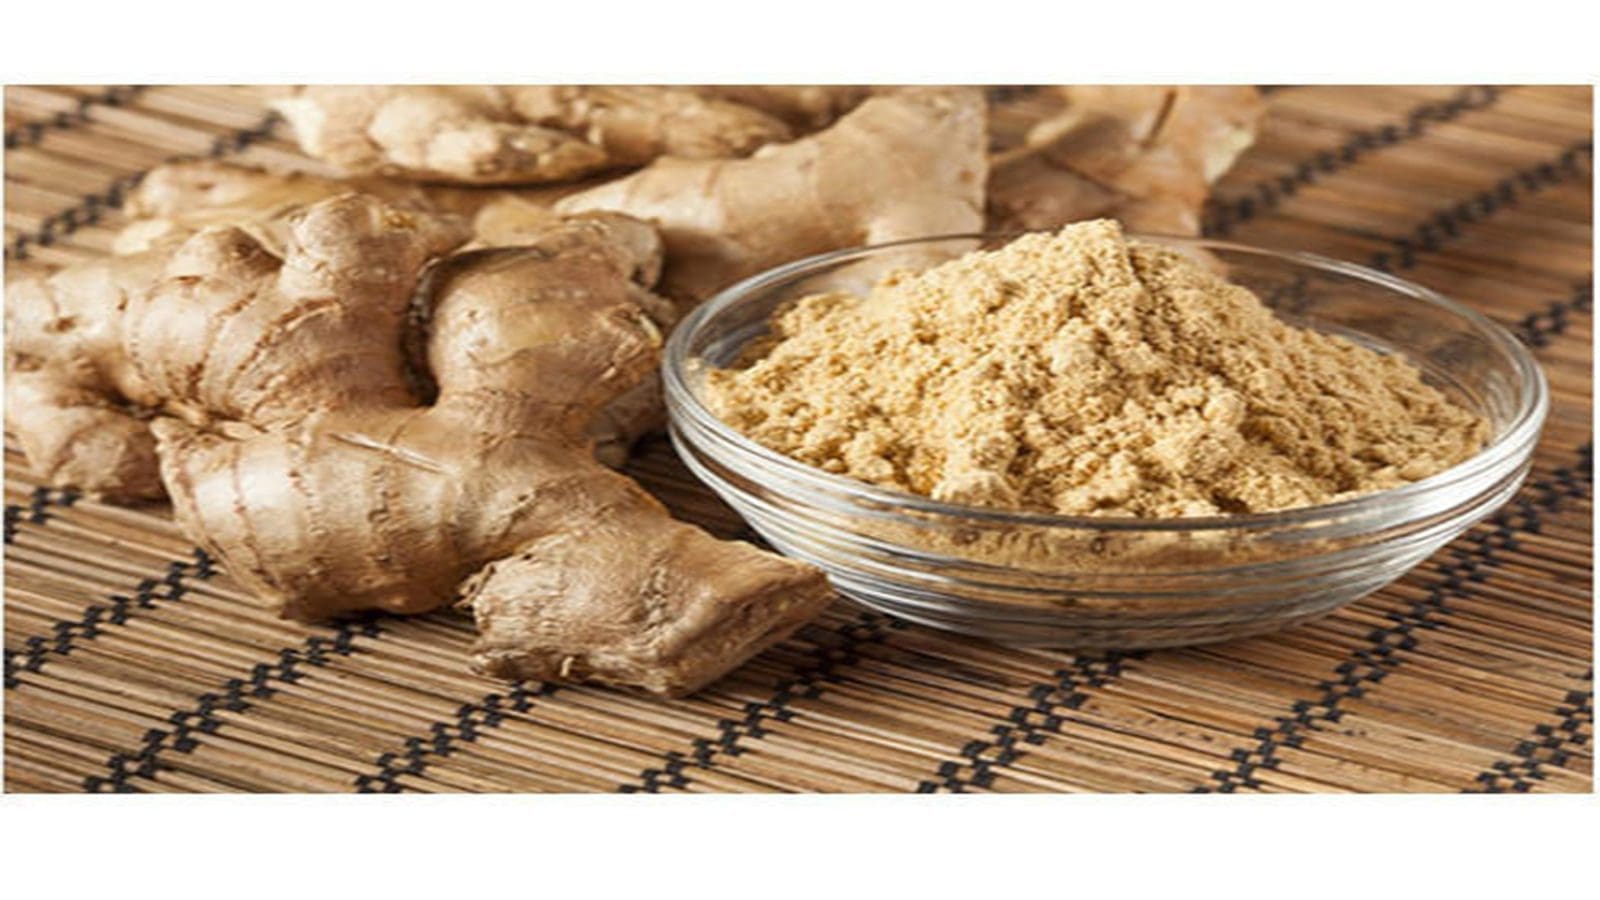 Kwame Nkrumah University researchers discover labelling malpractices in Ghana-made ginger powder